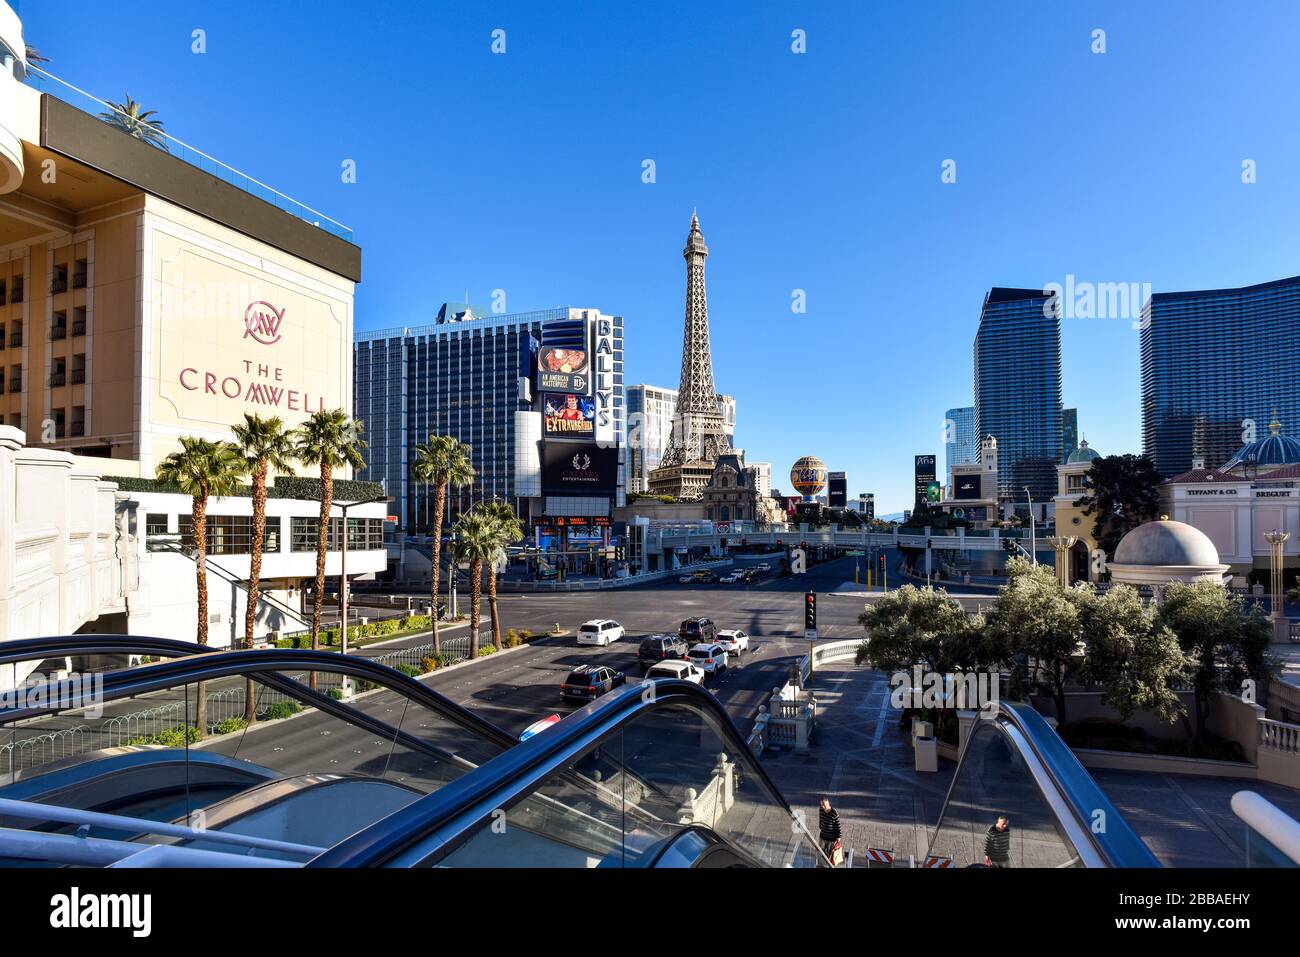 One week into the Las Vegas shut down due to Coronavirus, the Strip is fairly empty. No people on the streets and everything is closed. Stock Photo